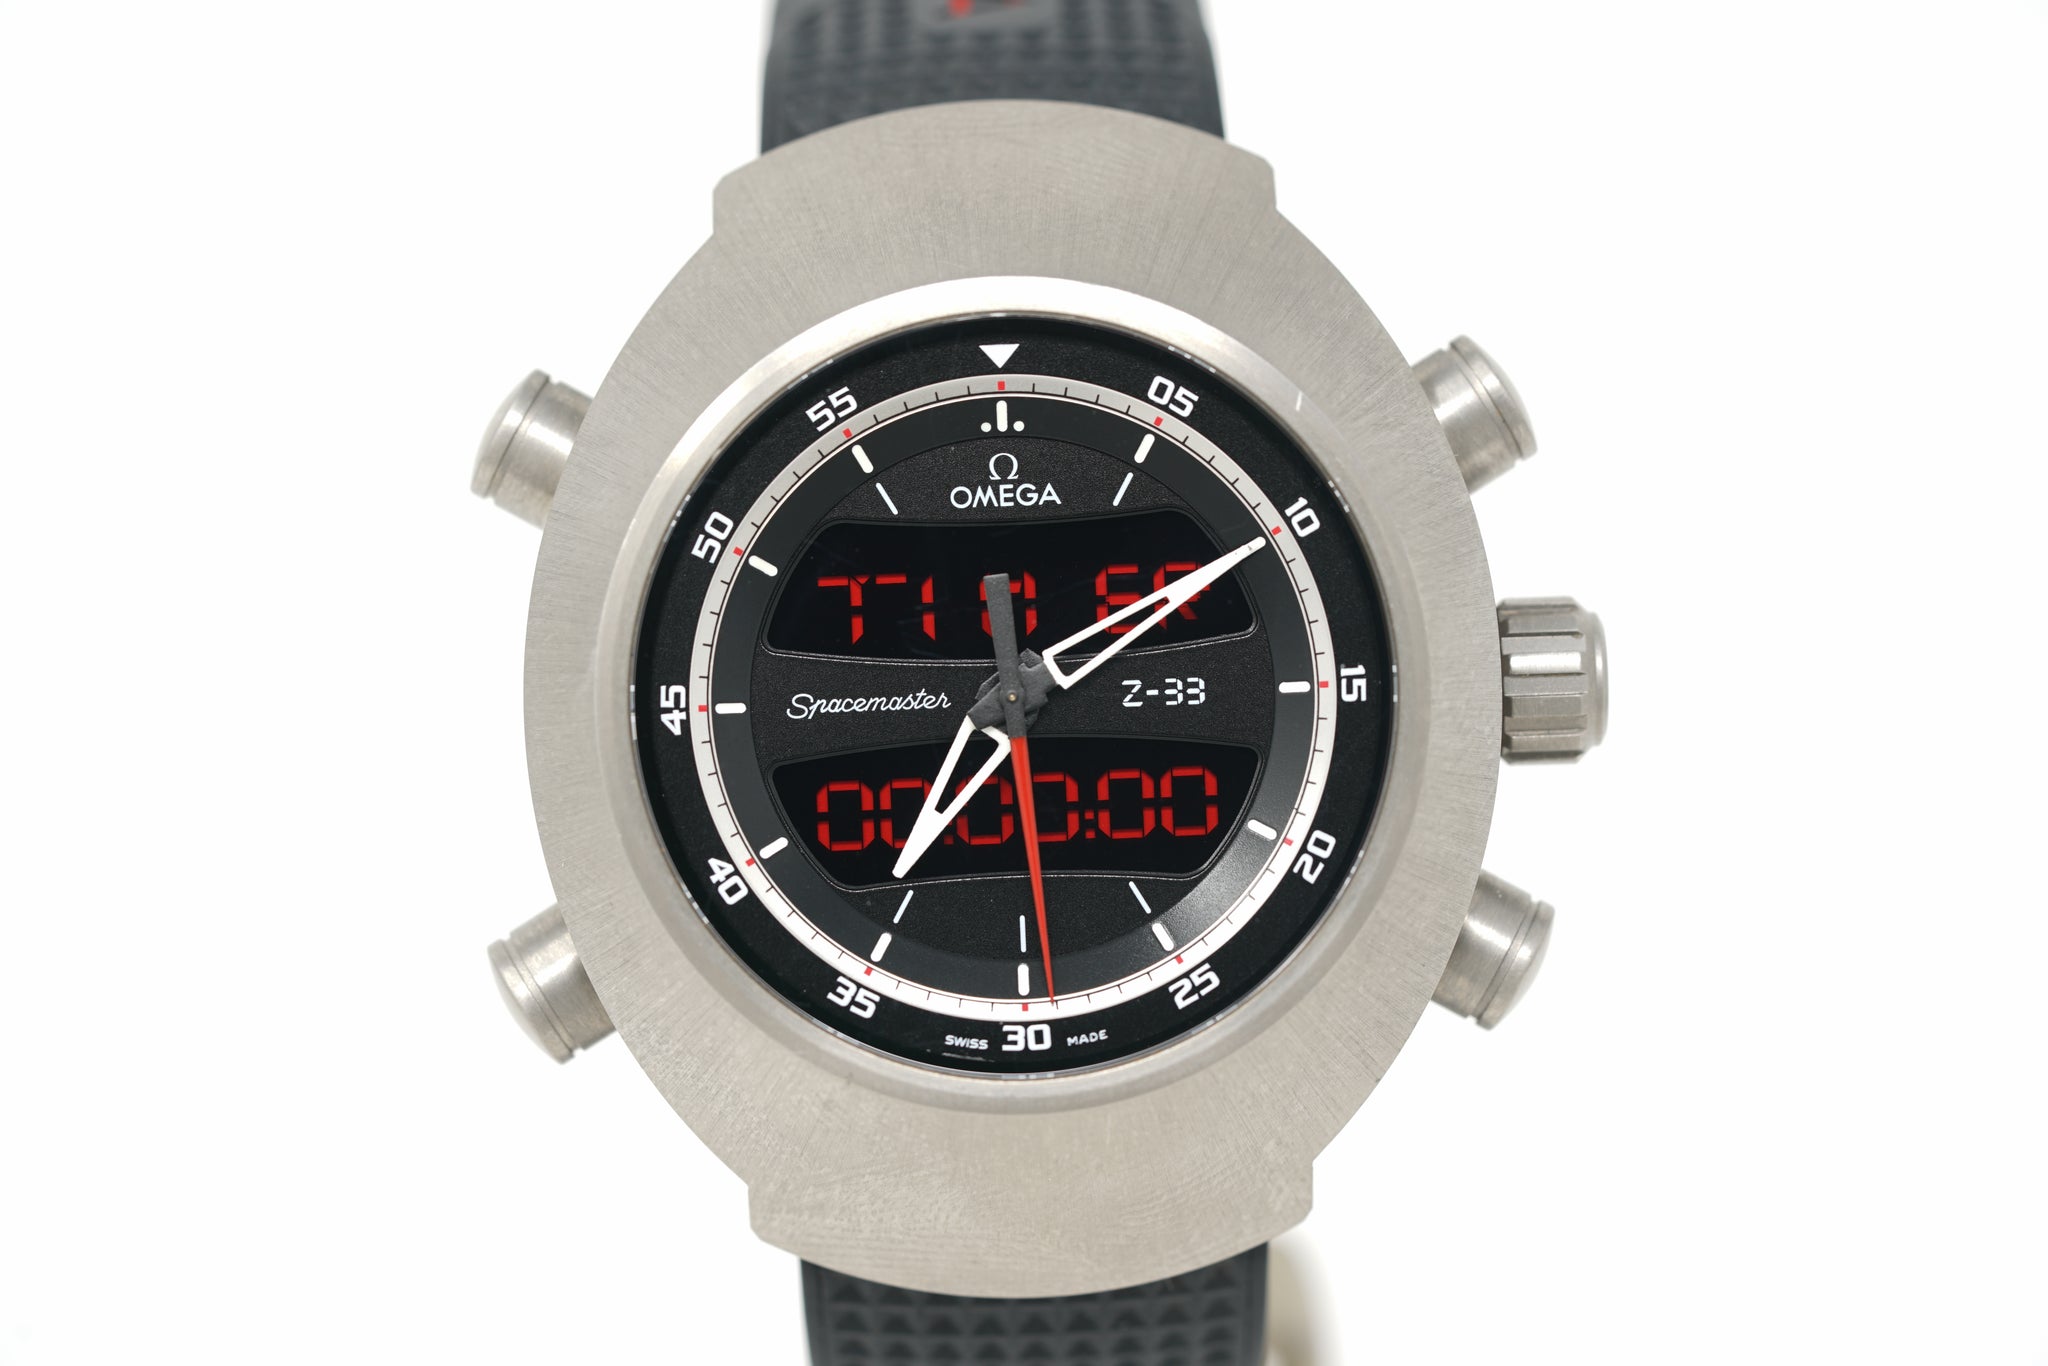 Ball Watch Engineer Hydrocarbon Spacemaster